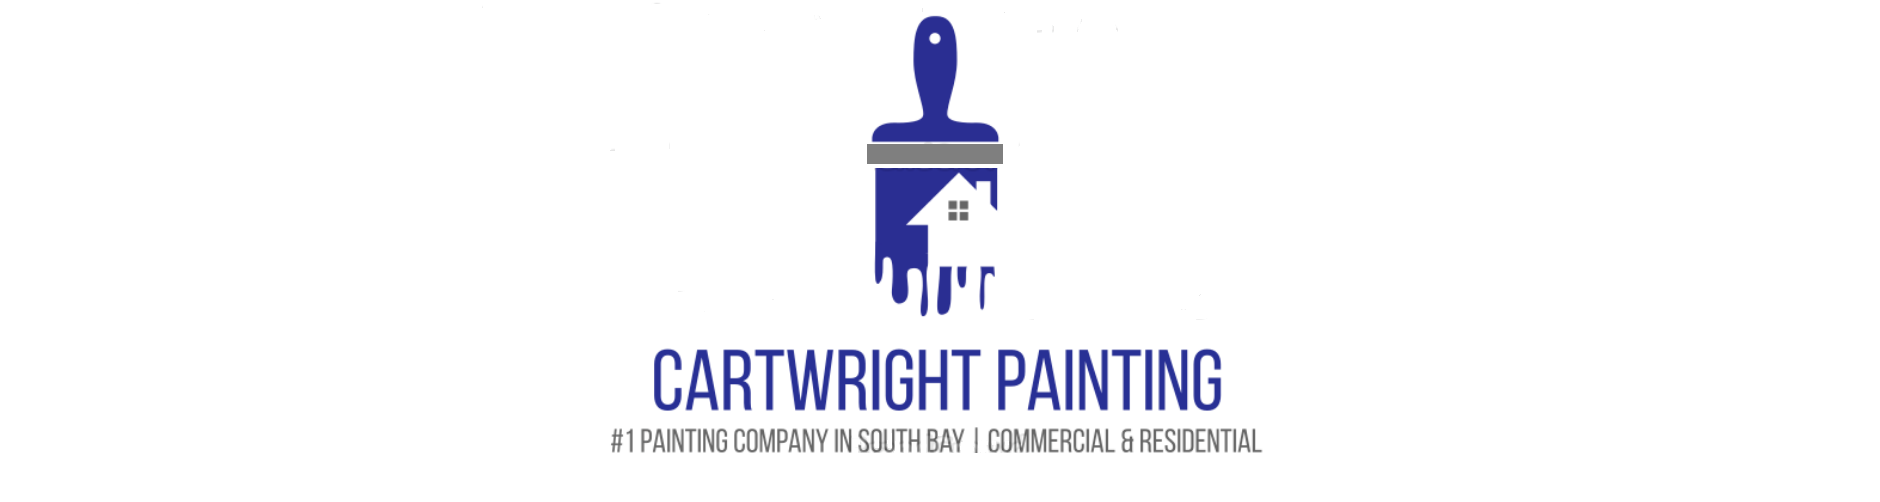 Cartwright Painting- Bay Area Premier Painters serving South Bay, East Bay, Peninsula and surrounding areas